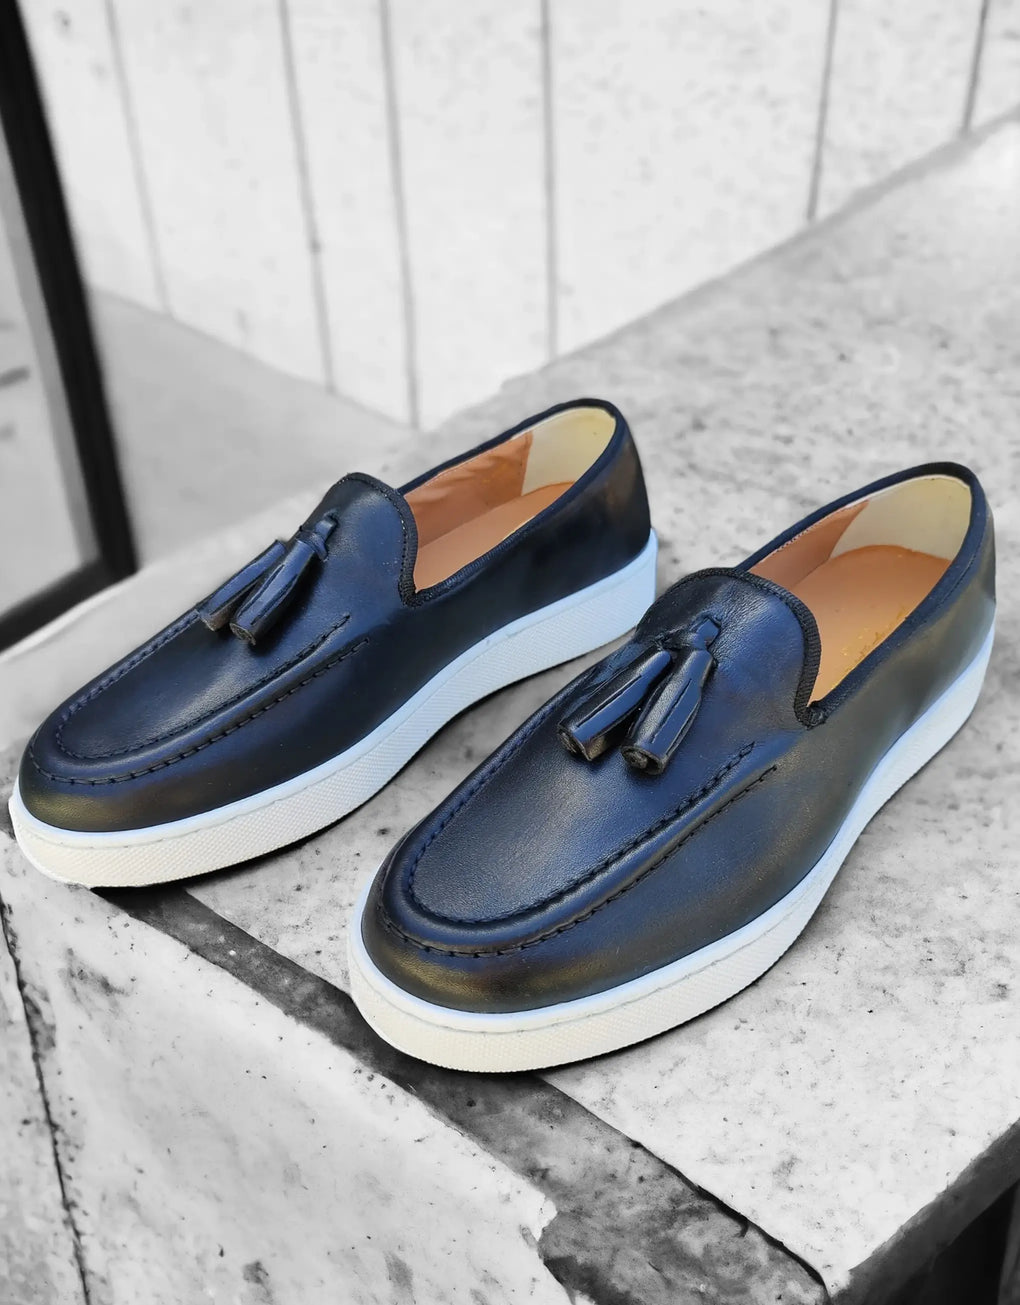 Tassel Loafers Leather